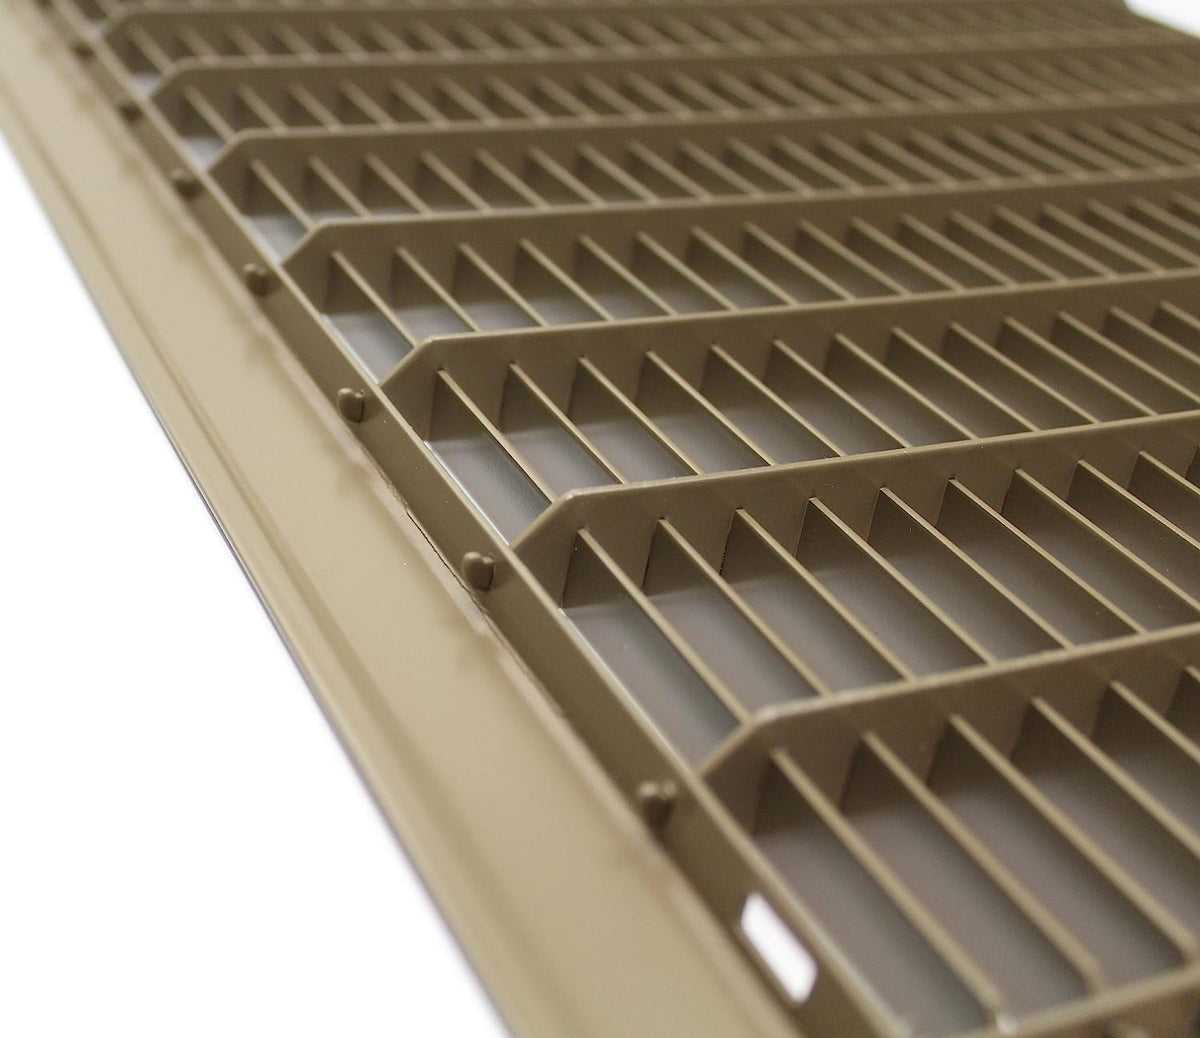 4&quot; X 8&quot; Or 8&quot; X 4&quot; Heavy Duty Floor Grille - Fixed Blades Air Grille - Brown [Outer Dimensions: 5.75 X 9.75]